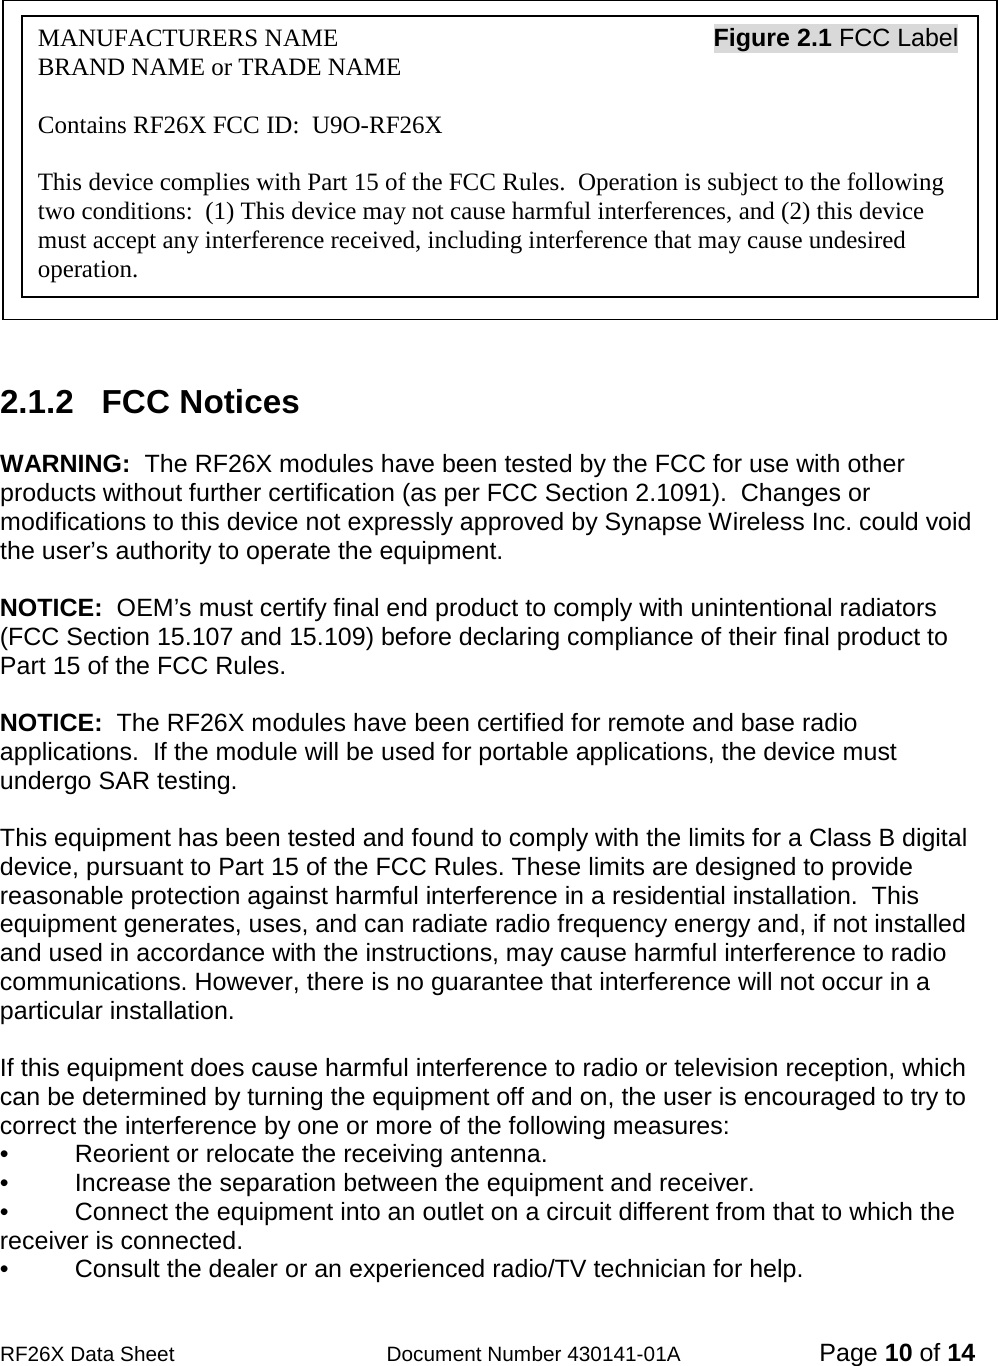                                            RF26X Data Sheet                  Document Number 430141-01A  Page 10 of 14             2.1.2   FCC Notices  WARNING:  The RF26X modules have been tested by the FCC for use with other products without further certification (as per FCC Section 2.1091).  Changes or modifications to this device not expressly approved by Synapse Wireless Inc. could void the user’s authority to operate the equipment.  NOTICE:  OEM’s must certify final end product to comply with unintentional radiators (FCC Section 15.107 and 15.109) before declaring compliance of their final product to Part 15 of the FCC Rules.  NOTICE:  The RF26X modules have been certified for remote and base radio applications.  If the module will be used for portable applications, the device must undergo SAR testing.  This equipment has been tested and found to comply with the limits for a Class B digital device, pursuant to Part 15 of the FCC Rules. These limits are designed to provide reasonable protection against harmful interference in a residential installation.  This equipment generates, uses, and can radiate radio frequency energy and, if not installed and used in accordance with the instructions, may cause harmful interference to radio communications. However, there is no guarantee that interference will not occur in a particular installation.   If this equipment does cause harmful interference to radio or television reception, which can be determined by turning the equipment off and on, the user is encouraged to try to correct the interference by one or more of the following measures: •   Reorient or relocate the receiving antenna. •   Increase the separation between the equipment and receiver. •   Connect the equipment into an outlet on a circuit different from that to which the receiver is connected. •   Consult the dealer or an experienced radio/TV technician for help. MANUFACTURERS NAME                                                            Figure 2.1 FCC Label BRAND NAME or TRADE NAME  Contains RF26X FCC ID:  U9O-RF26X  This device complies with Part 15 of the FCC Rules.  Operation is subject to the following two conditions:  (1) This device may not cause harmful interferences, and (2) this device must accept any interference received, including interference that may cause undesired operation. 